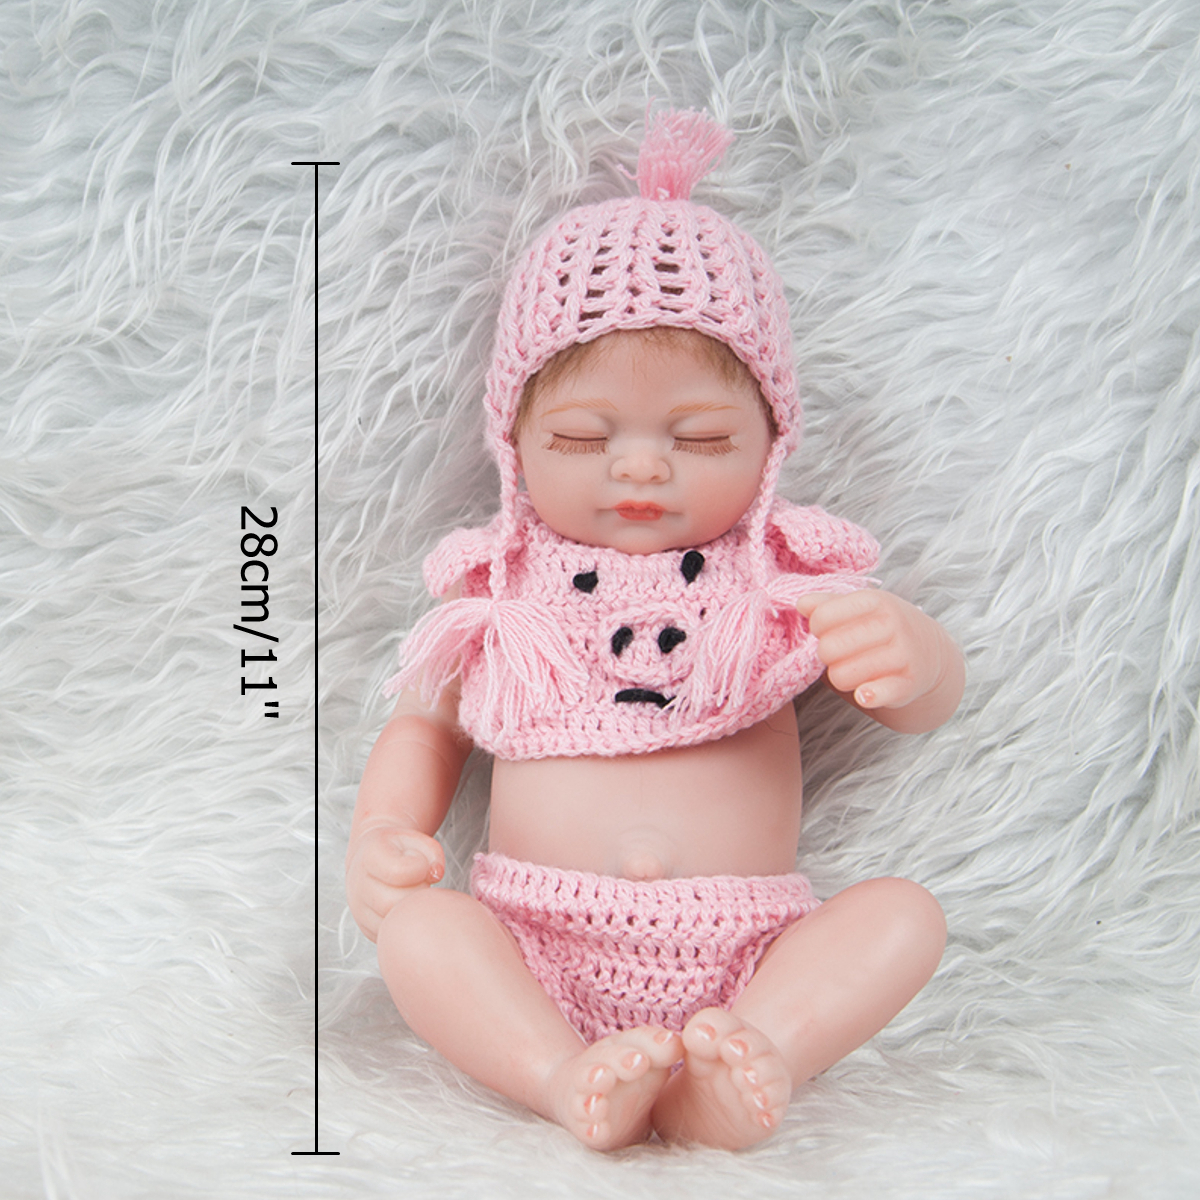 28CM-Soft-Silicone-Vinyl-Realistic-Sleeping-Reborn-Lifelike-Newborn-Baby-Doll-Toy-with-Moveable-Head-1731373-11